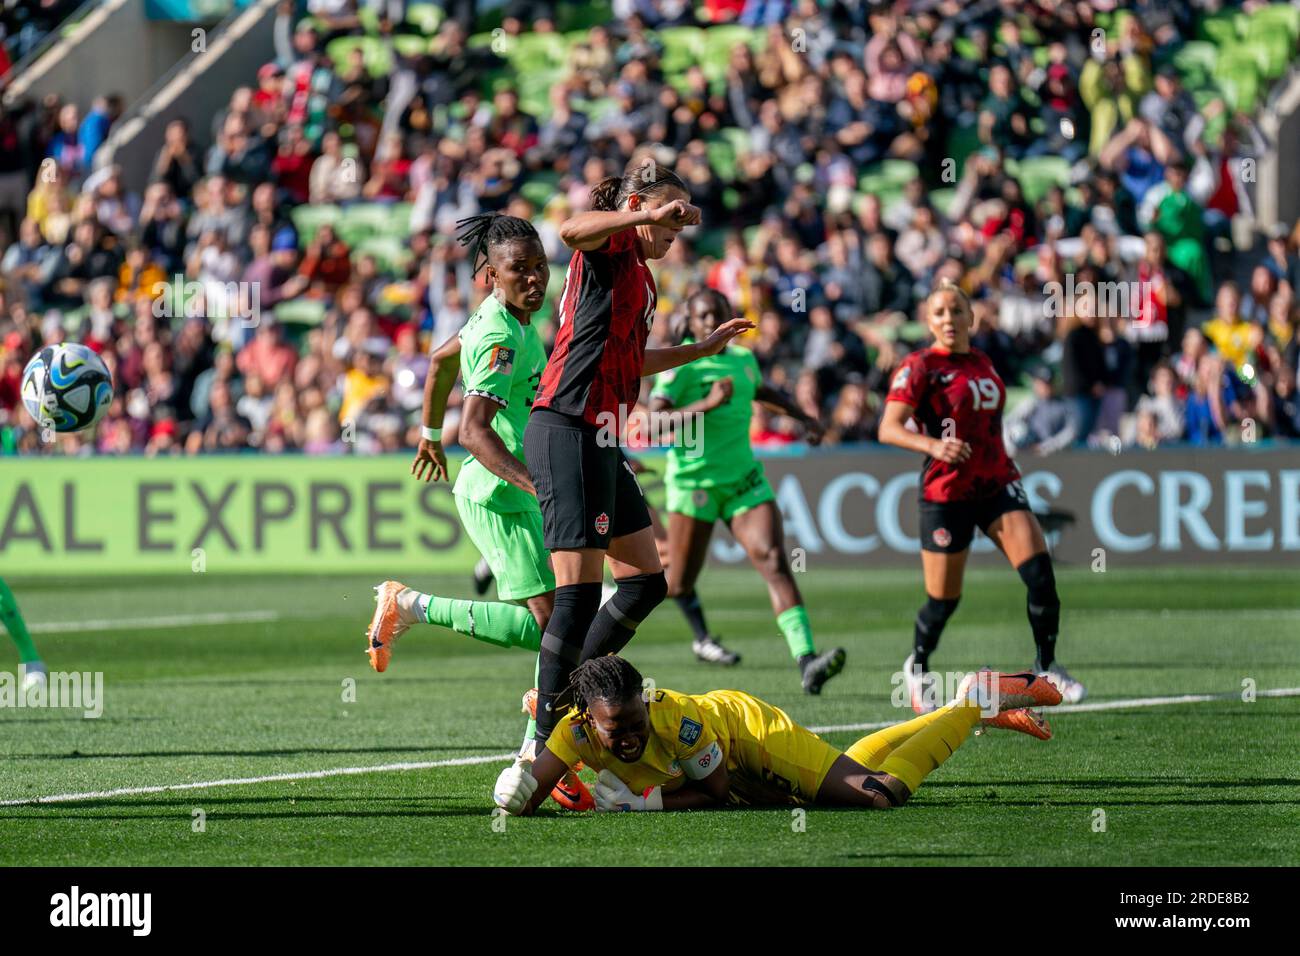 Melbourne, Australia. 21st July, 2023. Melbourne, Australia, July 21st 2023: Goalkeeper Chiamaka Nnadozie (16 Nigeria) is fouled by Christine Sinclair (12 Canada) during the 2023 FIFA Womens World Cup football match between Nigeria and Canada at Melbourne Rectangular Stadium in Melbourne, Australia. (Noe Llamas/SPP) Credit: SPP Sport Press Photo. /Alamy Live News Stock Photo